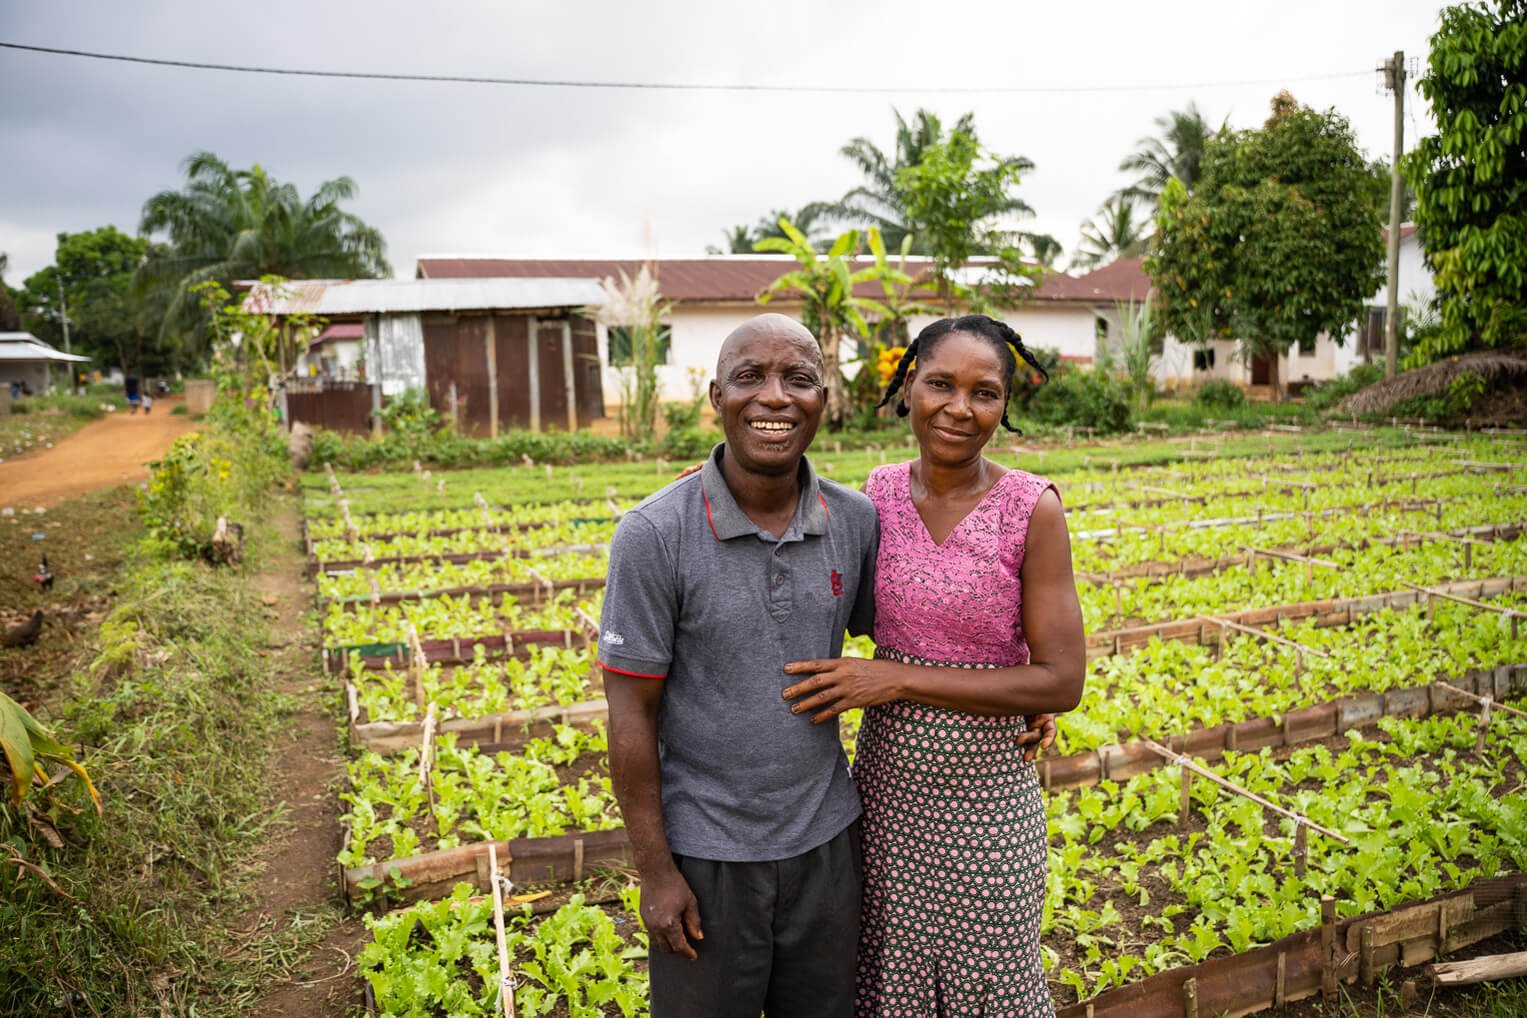 Teewon, left, and his wife, Phaelline, are in their second year growing with the Eden Project.